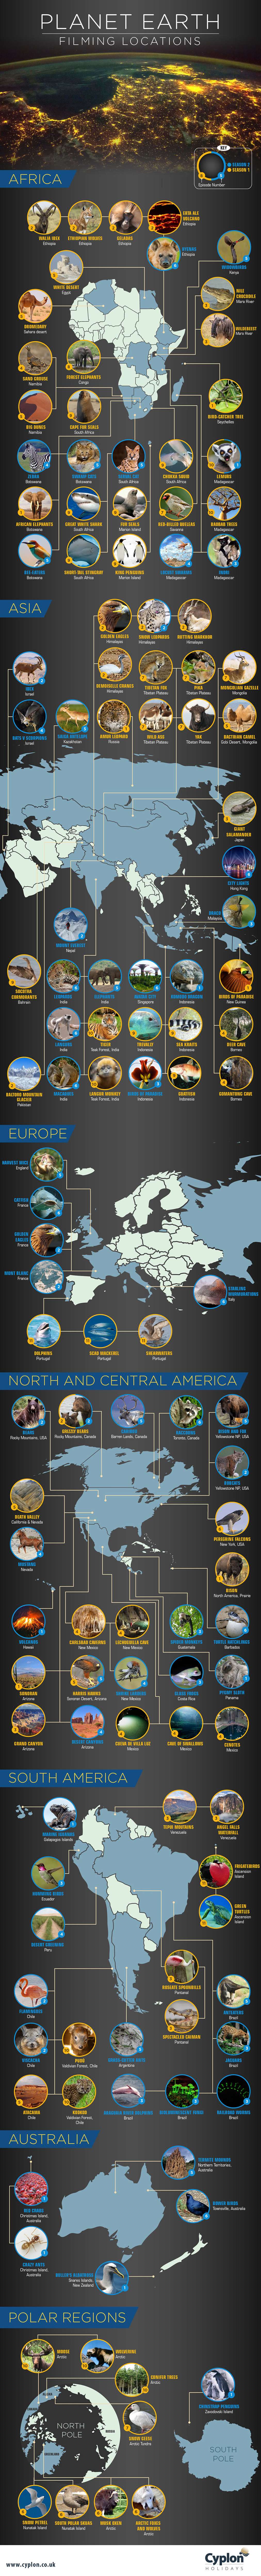 Filming Locations Featured in BBC Planet Earth Infographic